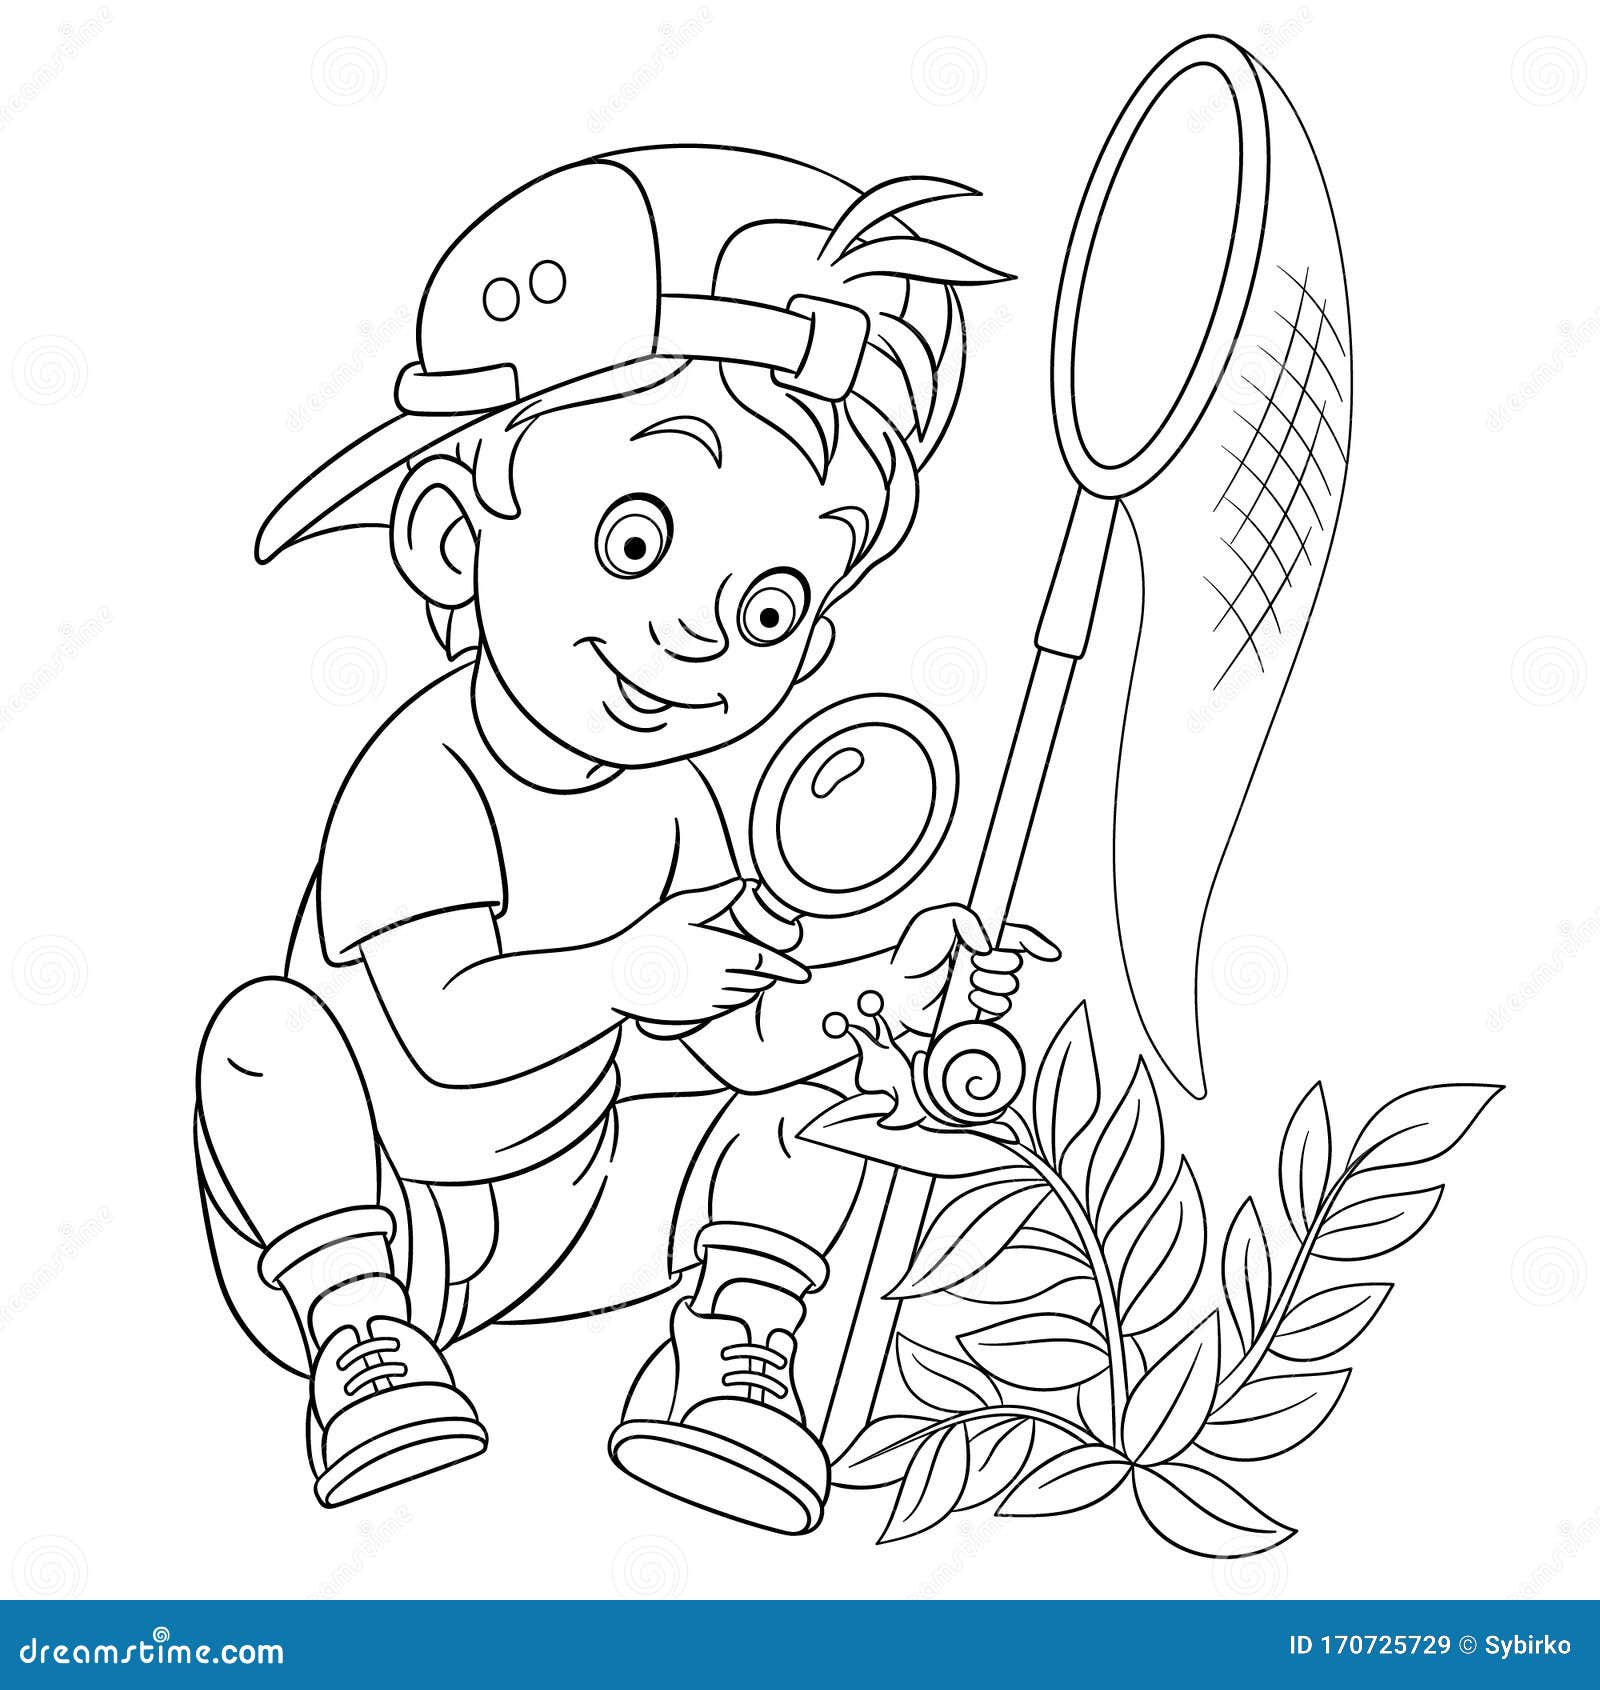 Coloring Page with Boy Discovering Nature Stock Vector ...